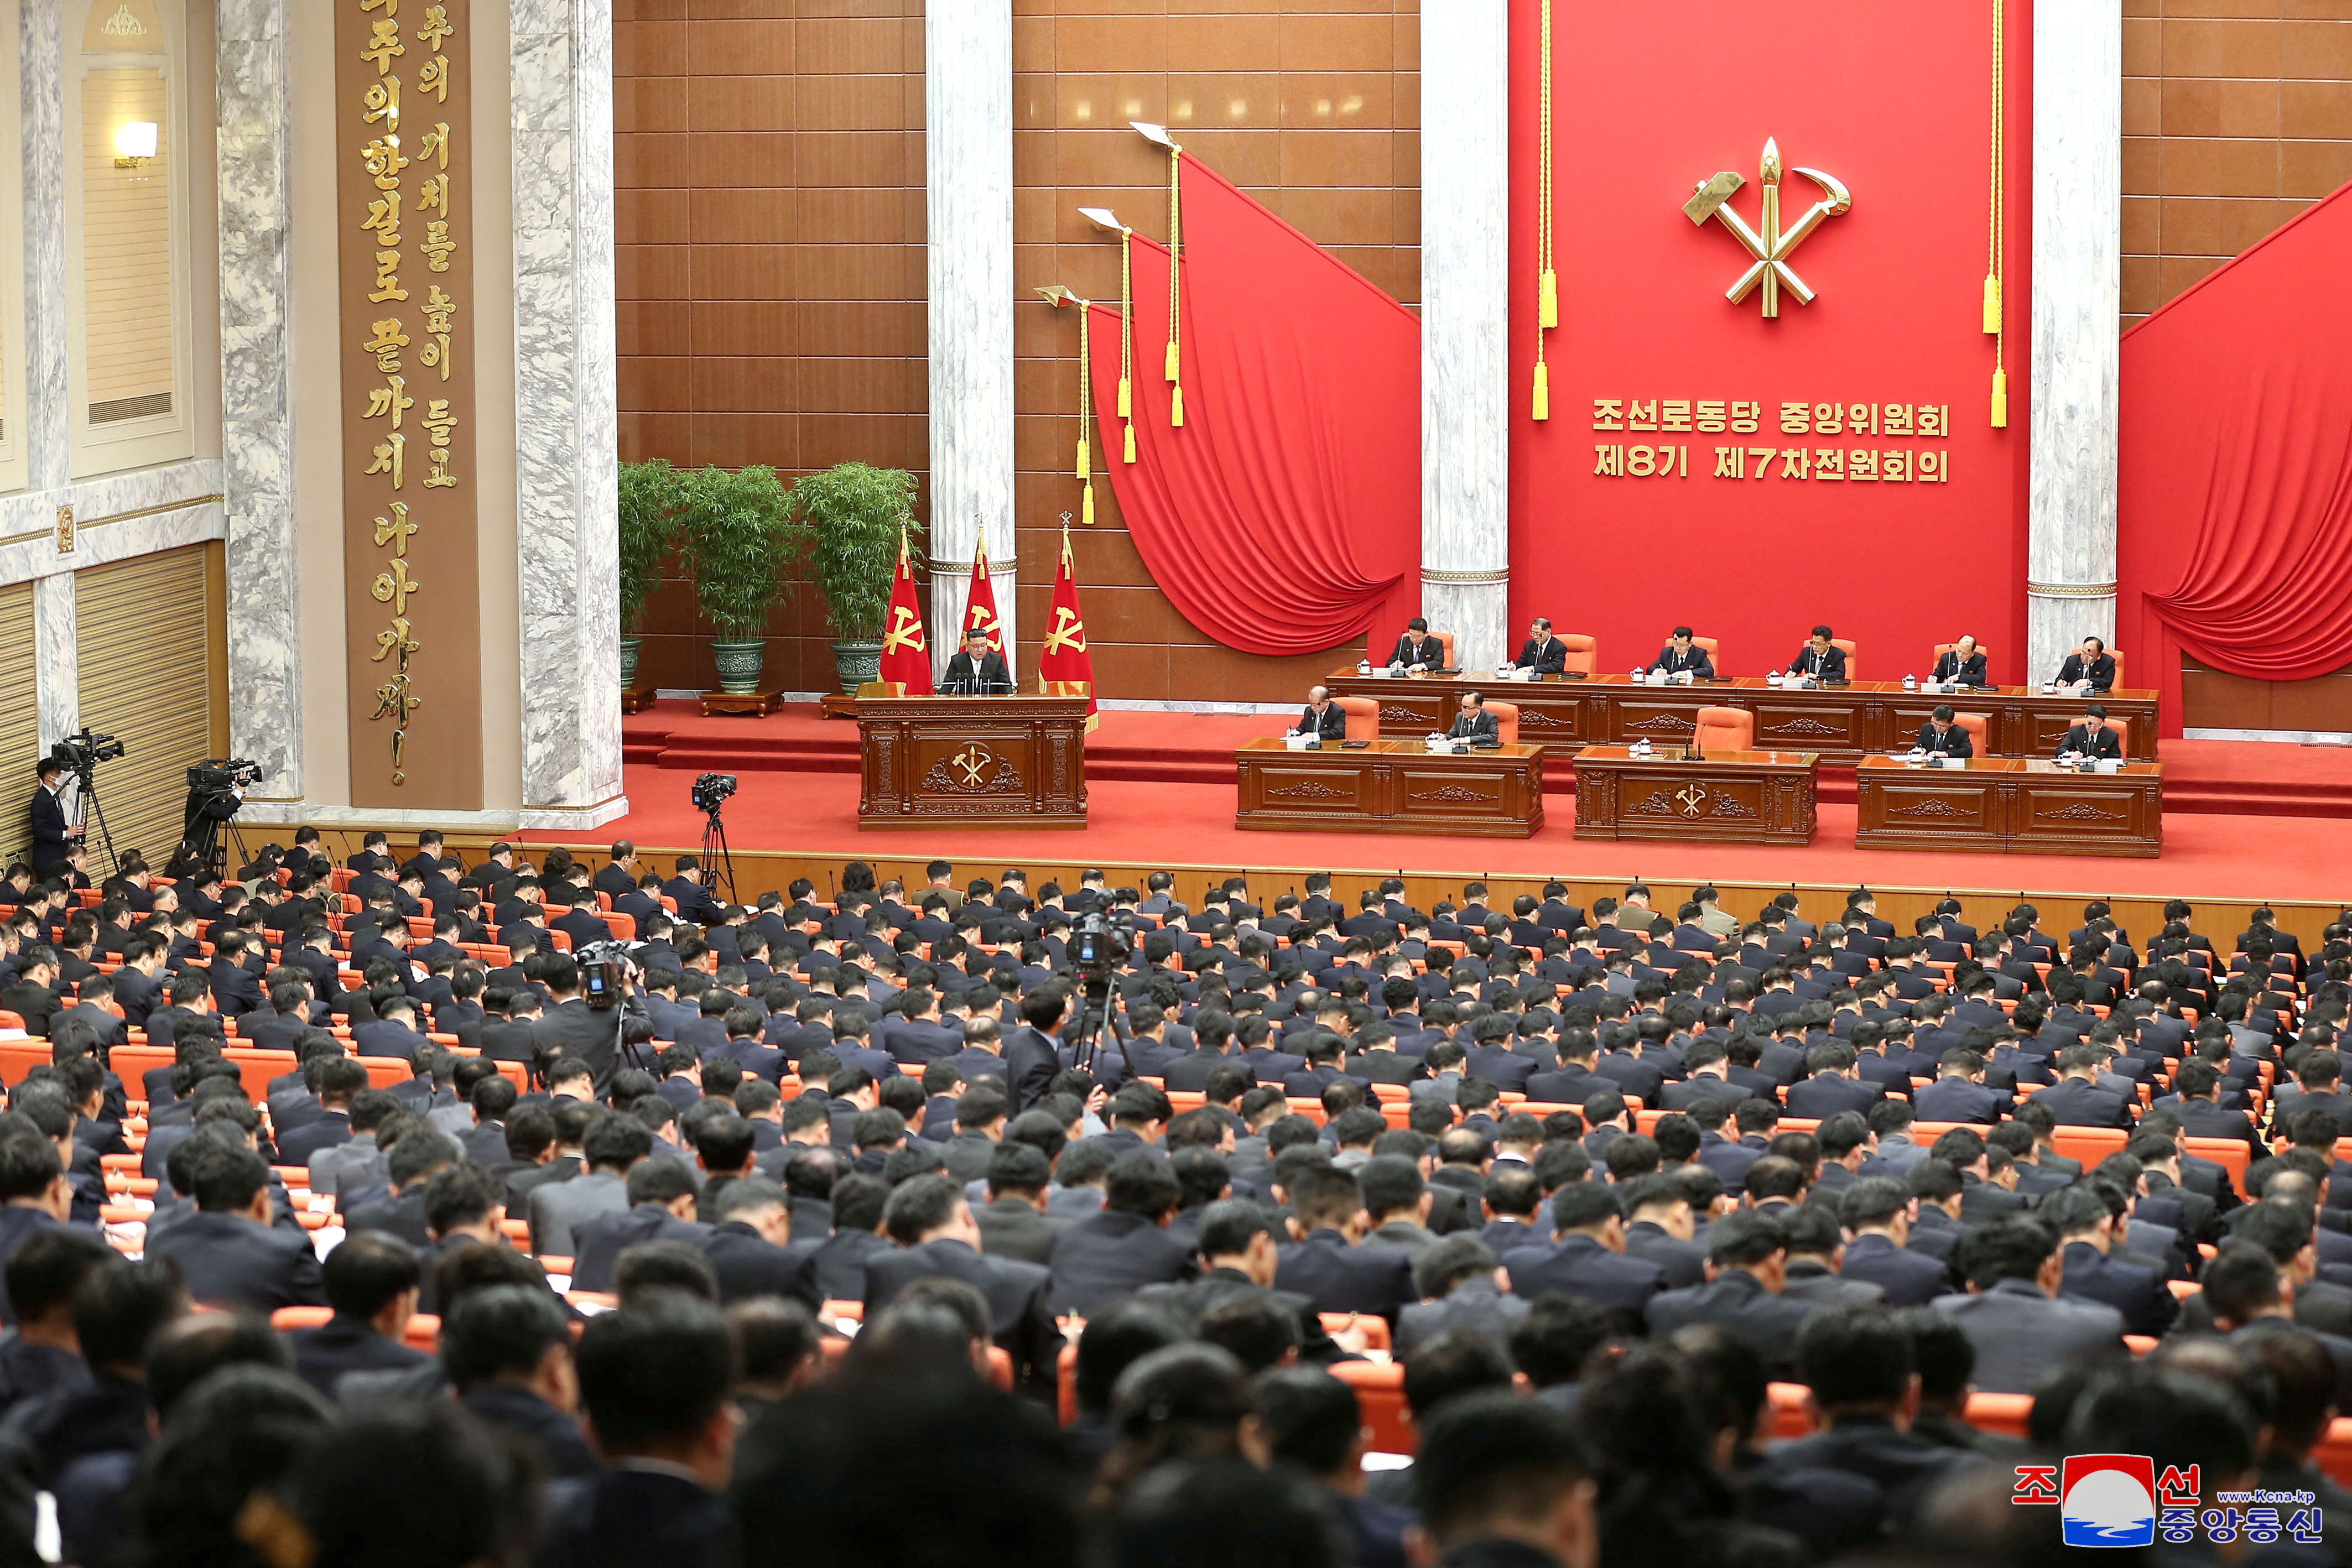 The 7th enlarged plenary meeting of the 8th Central Committee of the Workers' Party of Korea (WPK) in Pyongyang